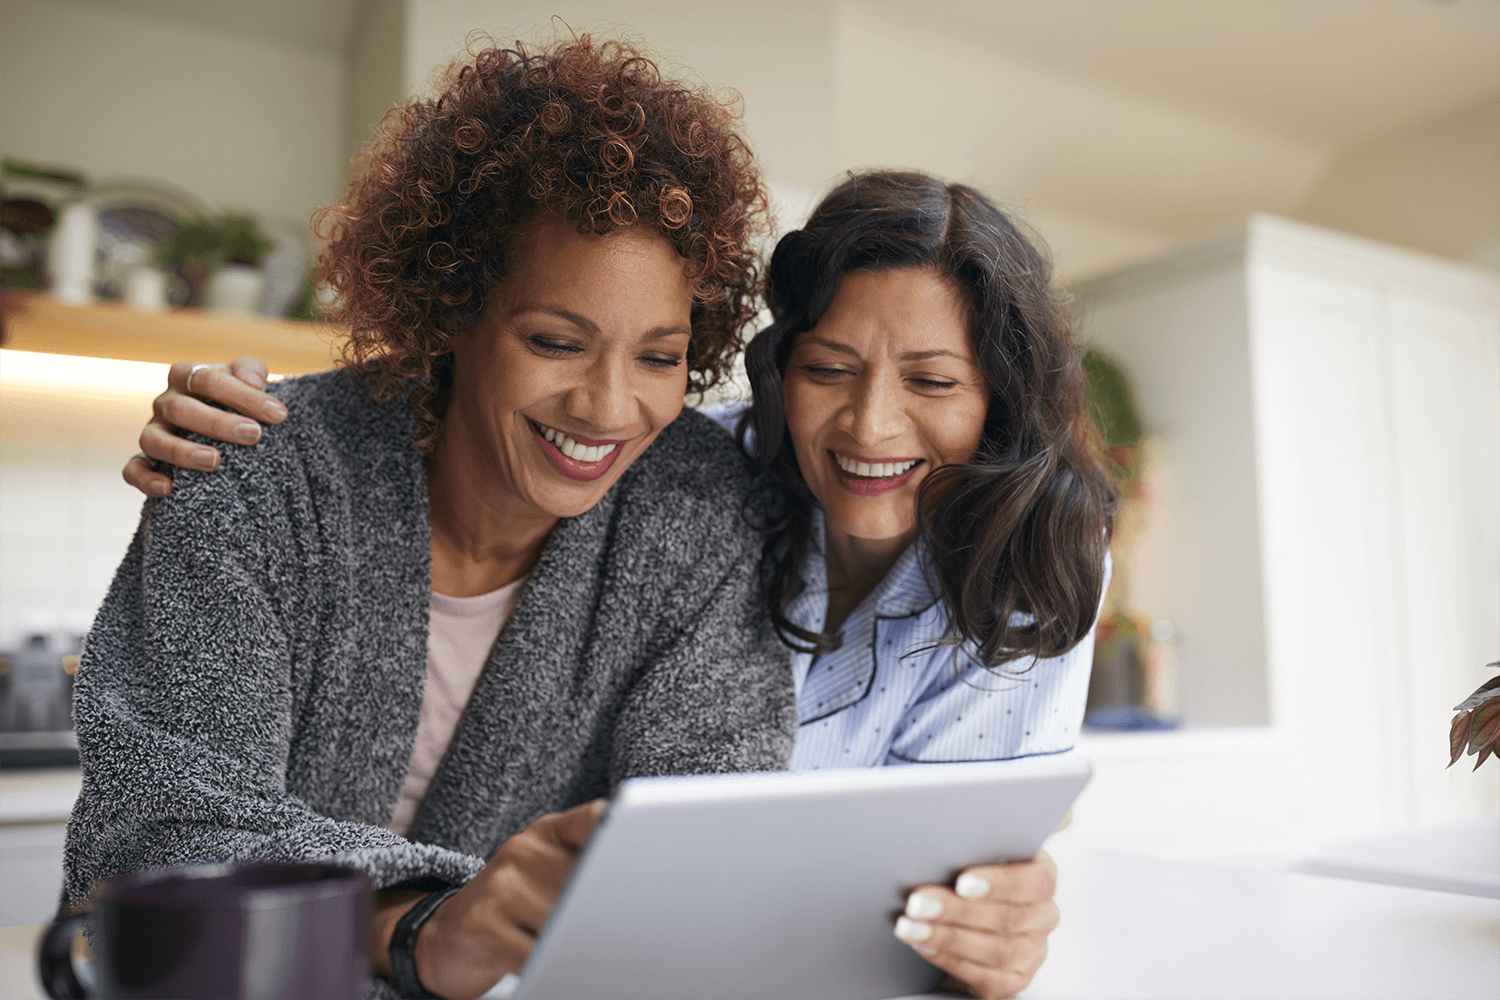 Two women looking at a tablet and smiling